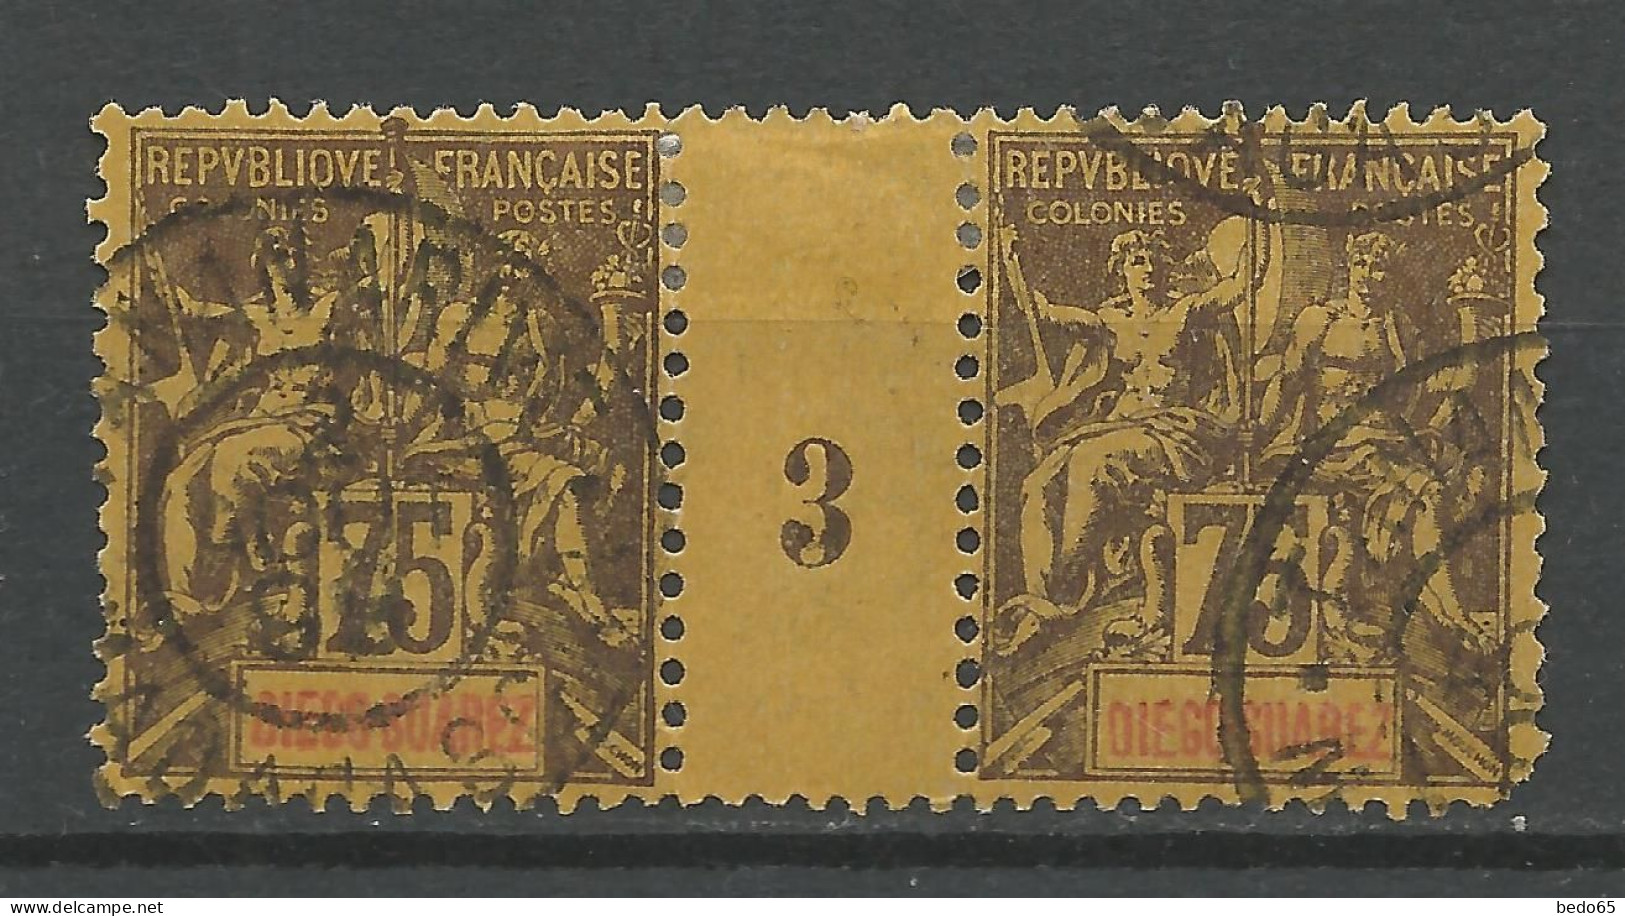 DIEGO-SUAREZ N° 49 CACHET TANANARIVE / Angle Court Sur Timbre De Gauche / Used - Used Stamps